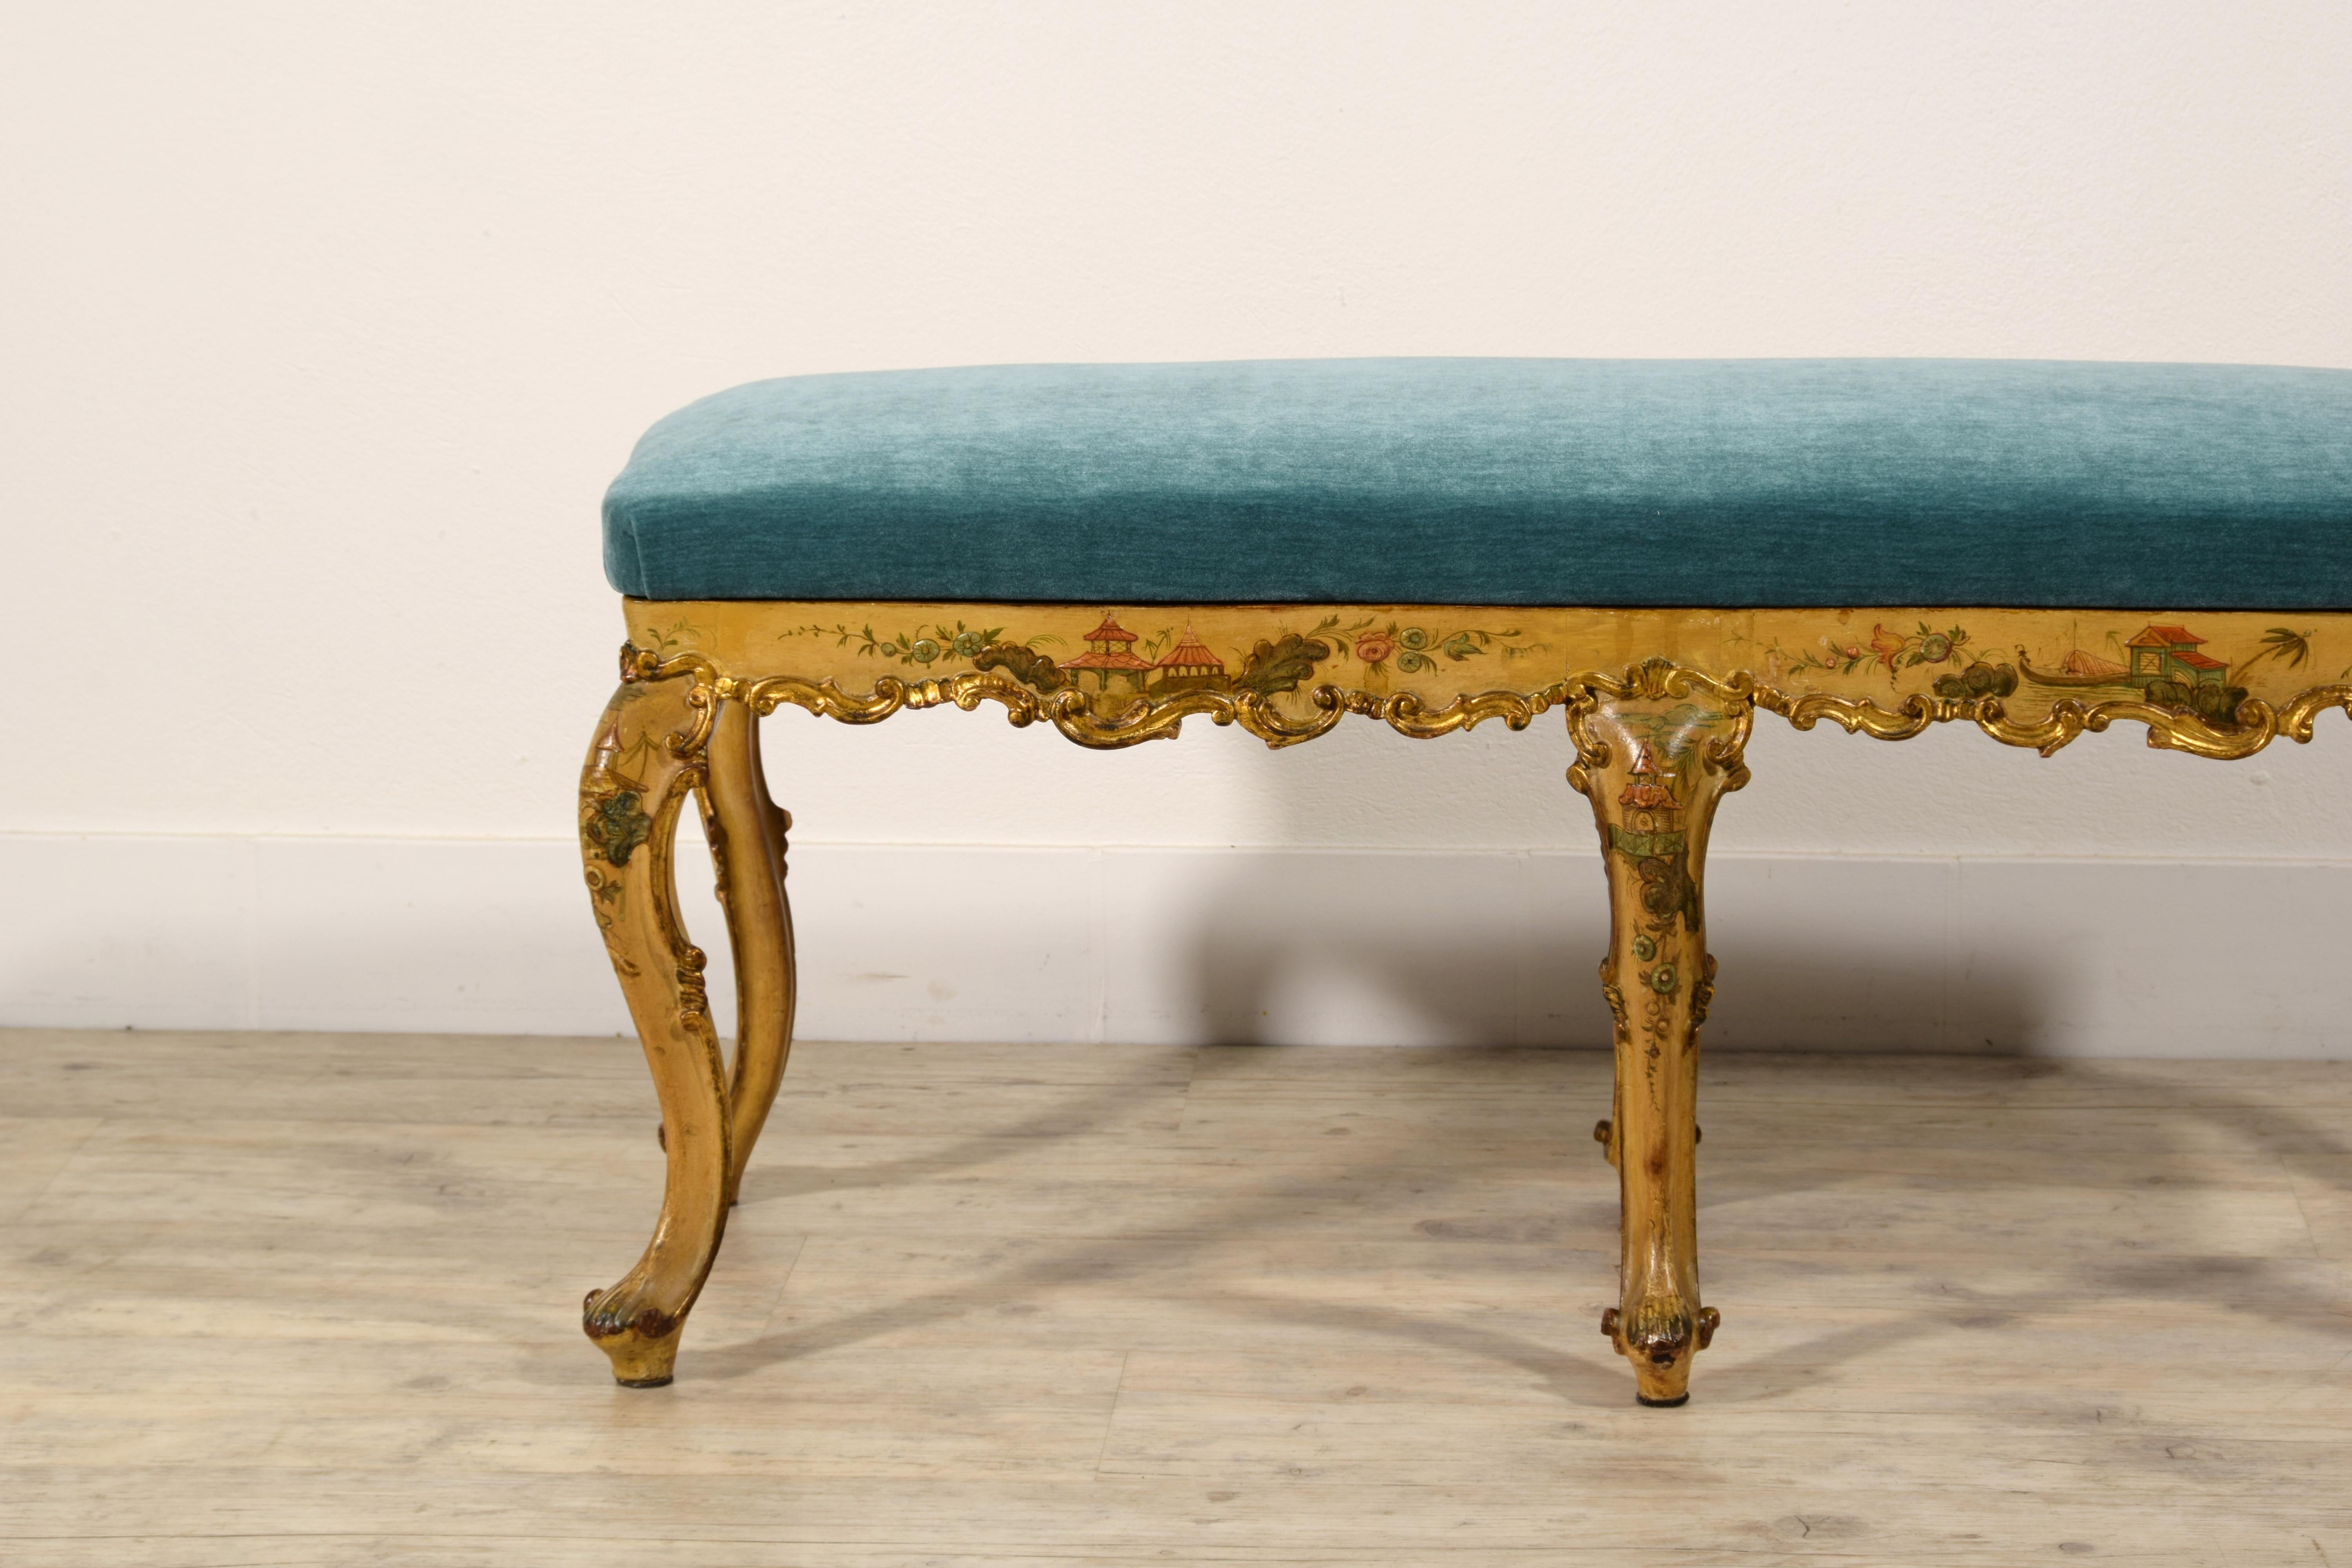 Wood 20th Century, Venetian Baroque Stile Carved and Laquered Giltwood Bench For Sale